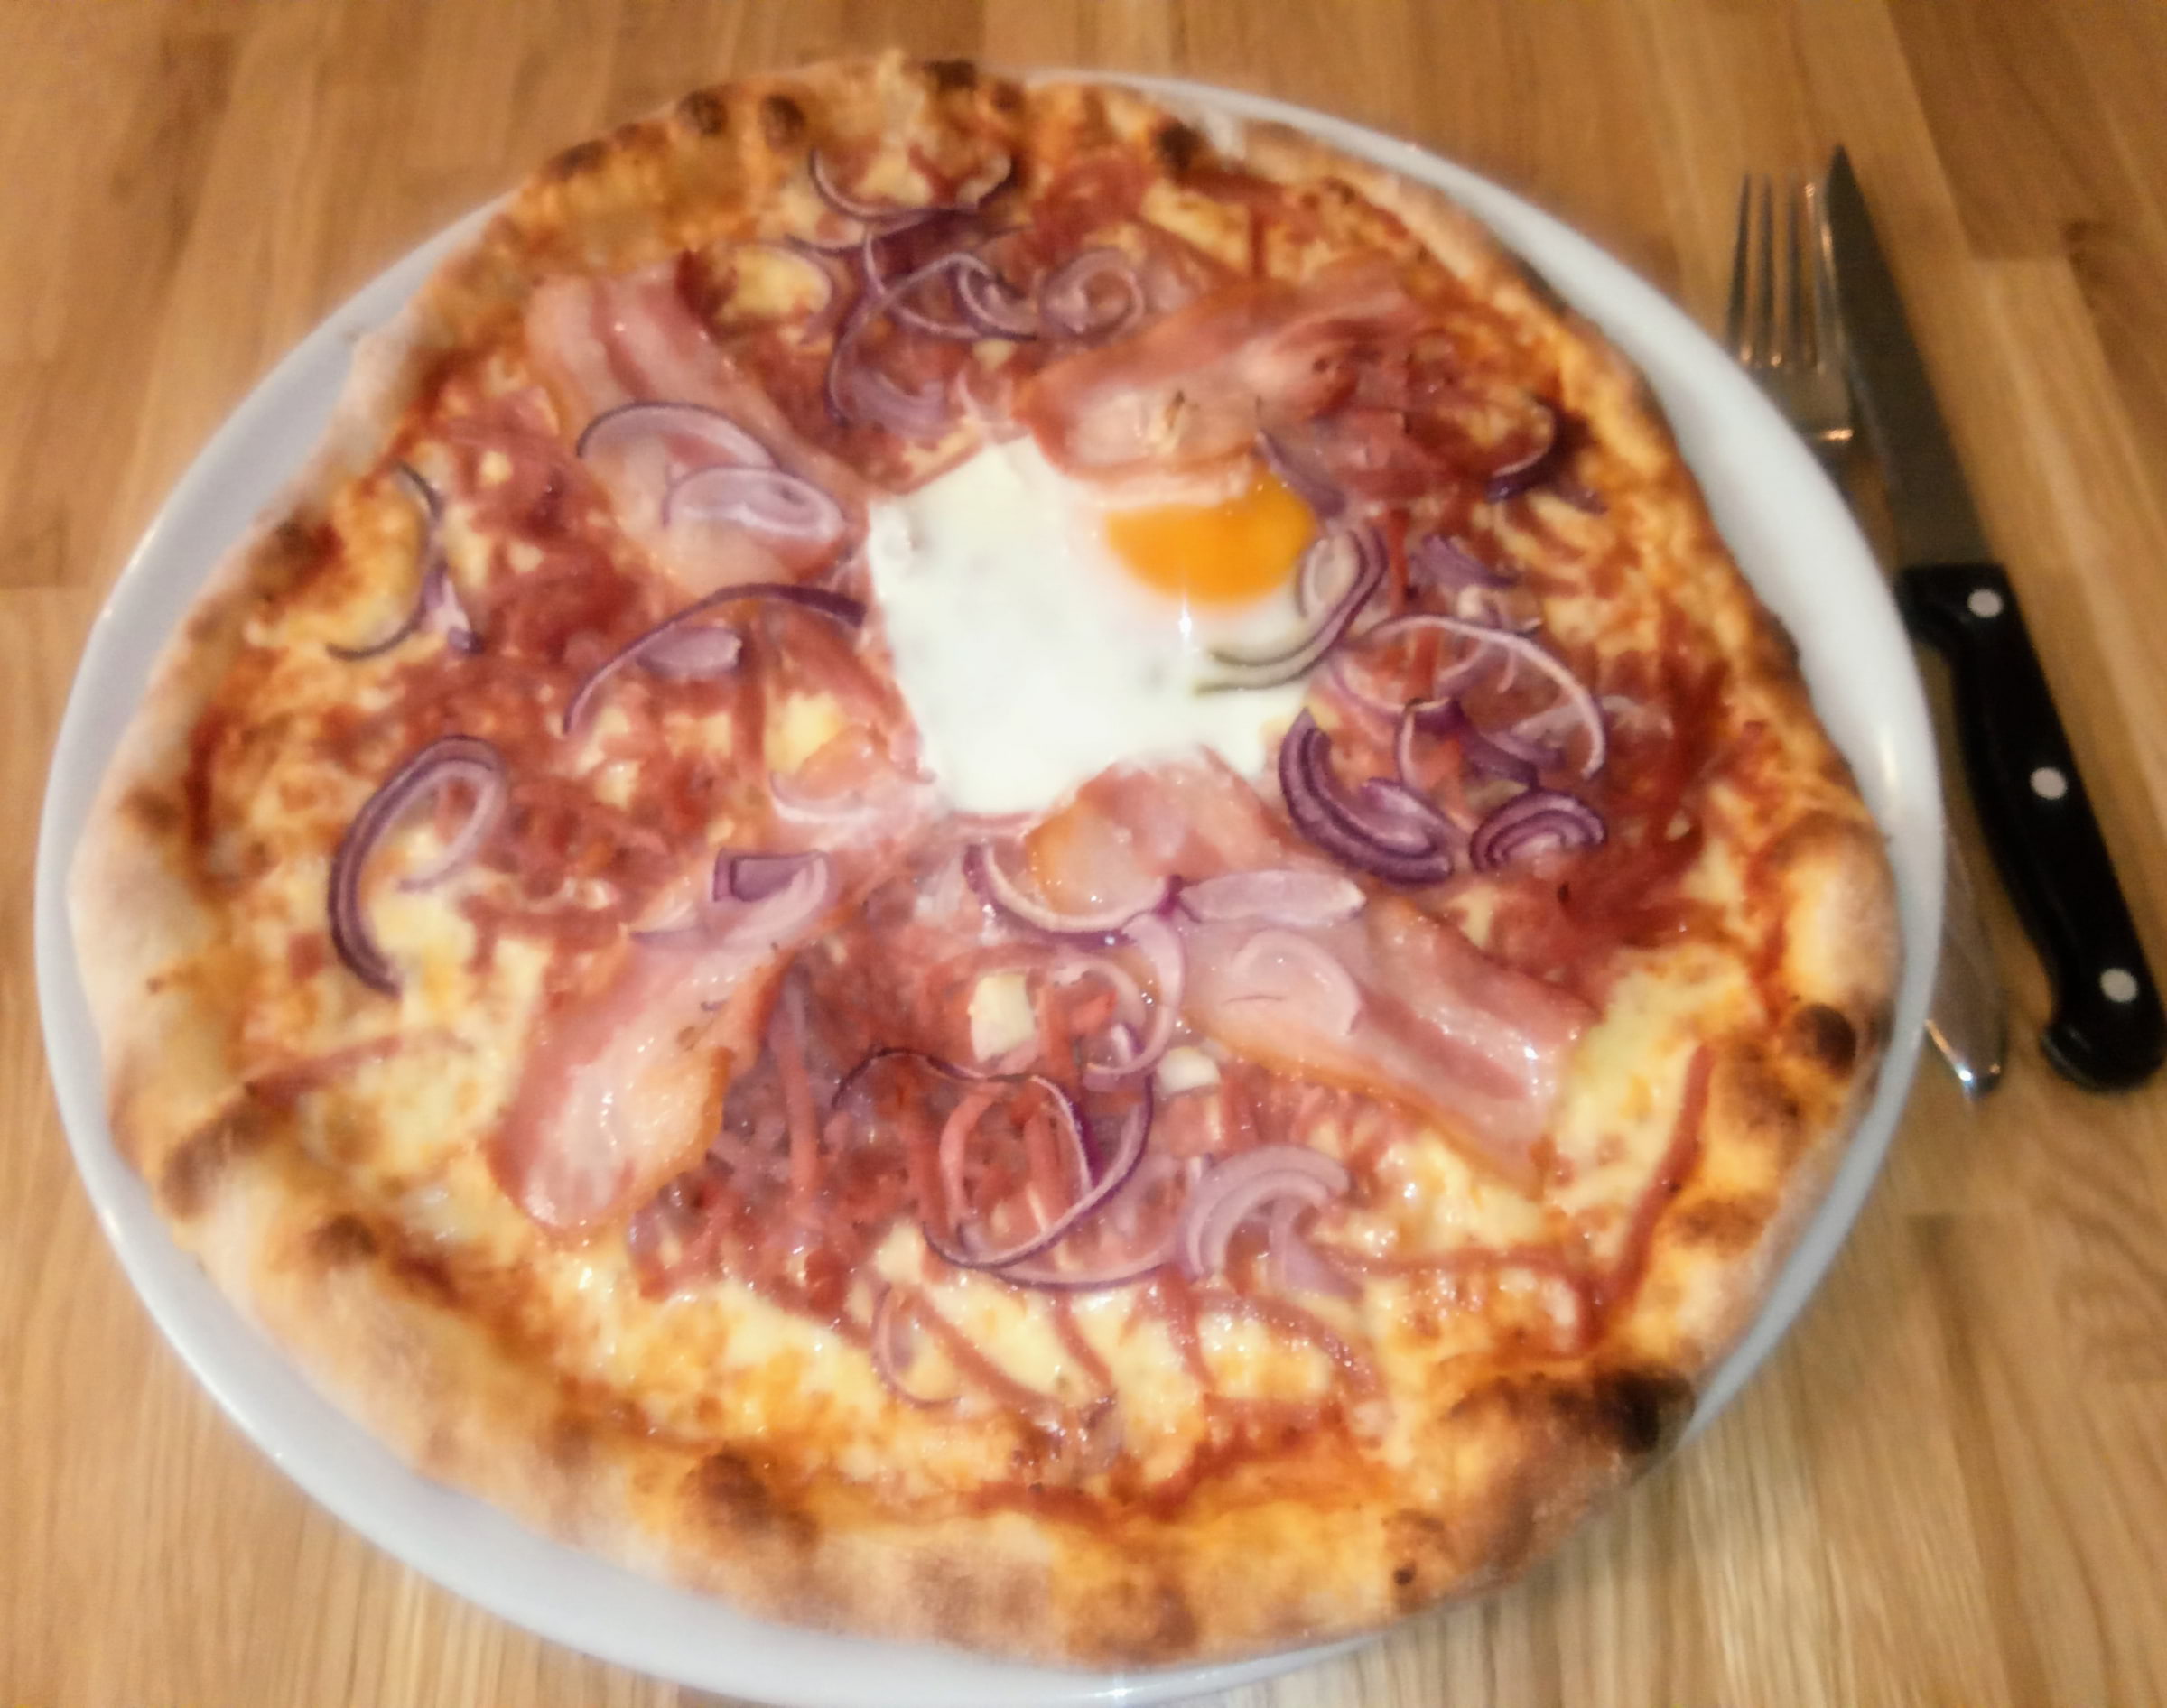 Pizza bomba – Photo from Halv 8 Hos Gert by Gert N. (20/05/2020)